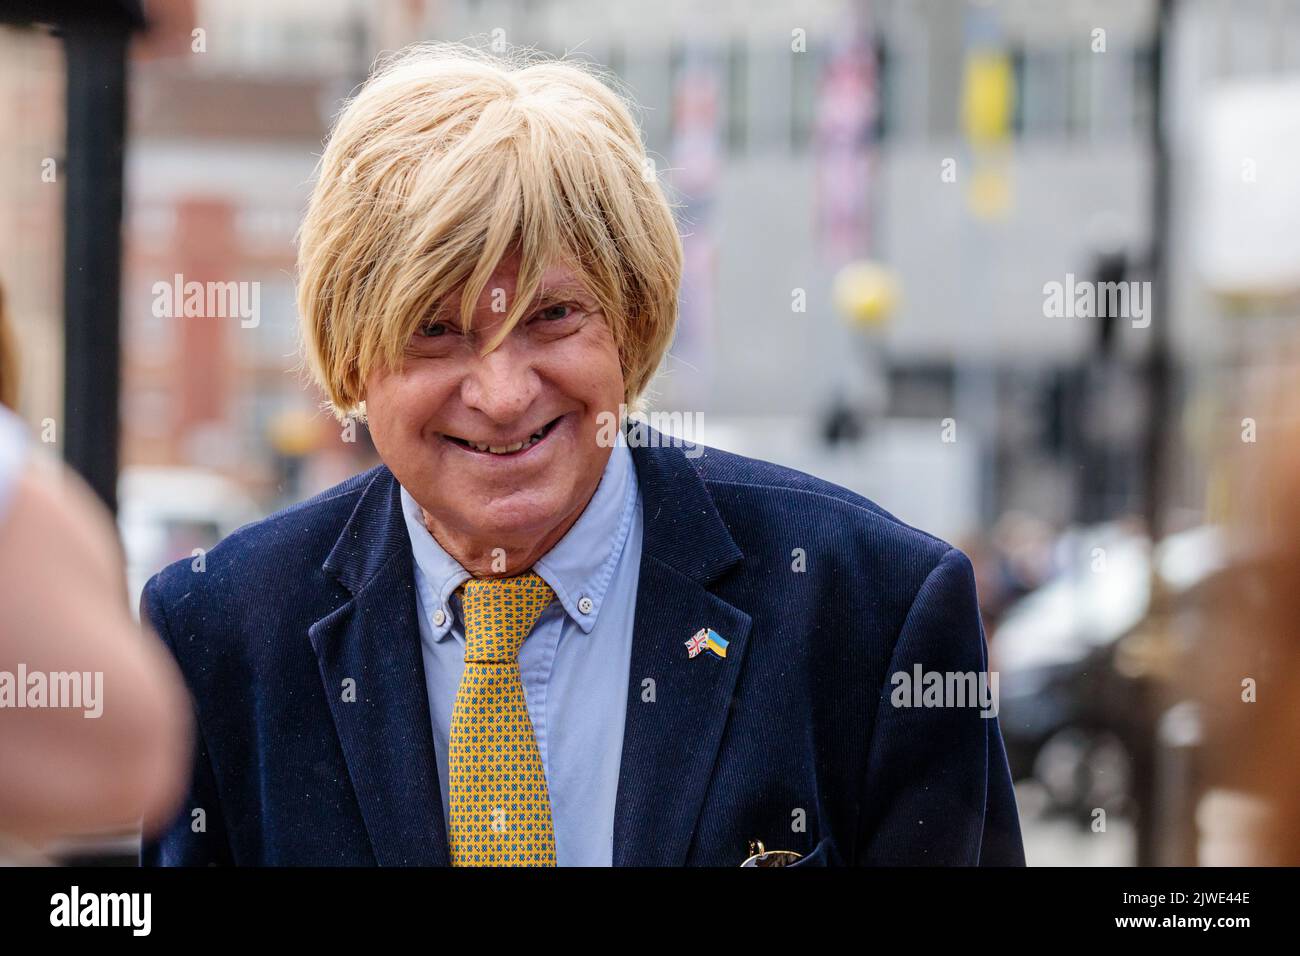 Westminster, London, UK, 5th September 2022.  Michael Fabricant arriving at the Queen Elizabeth II centre for the result and announcement for new Conservative party leader and UK Prime Minister. Amanda Rose/Alamy Live News Stock Photo